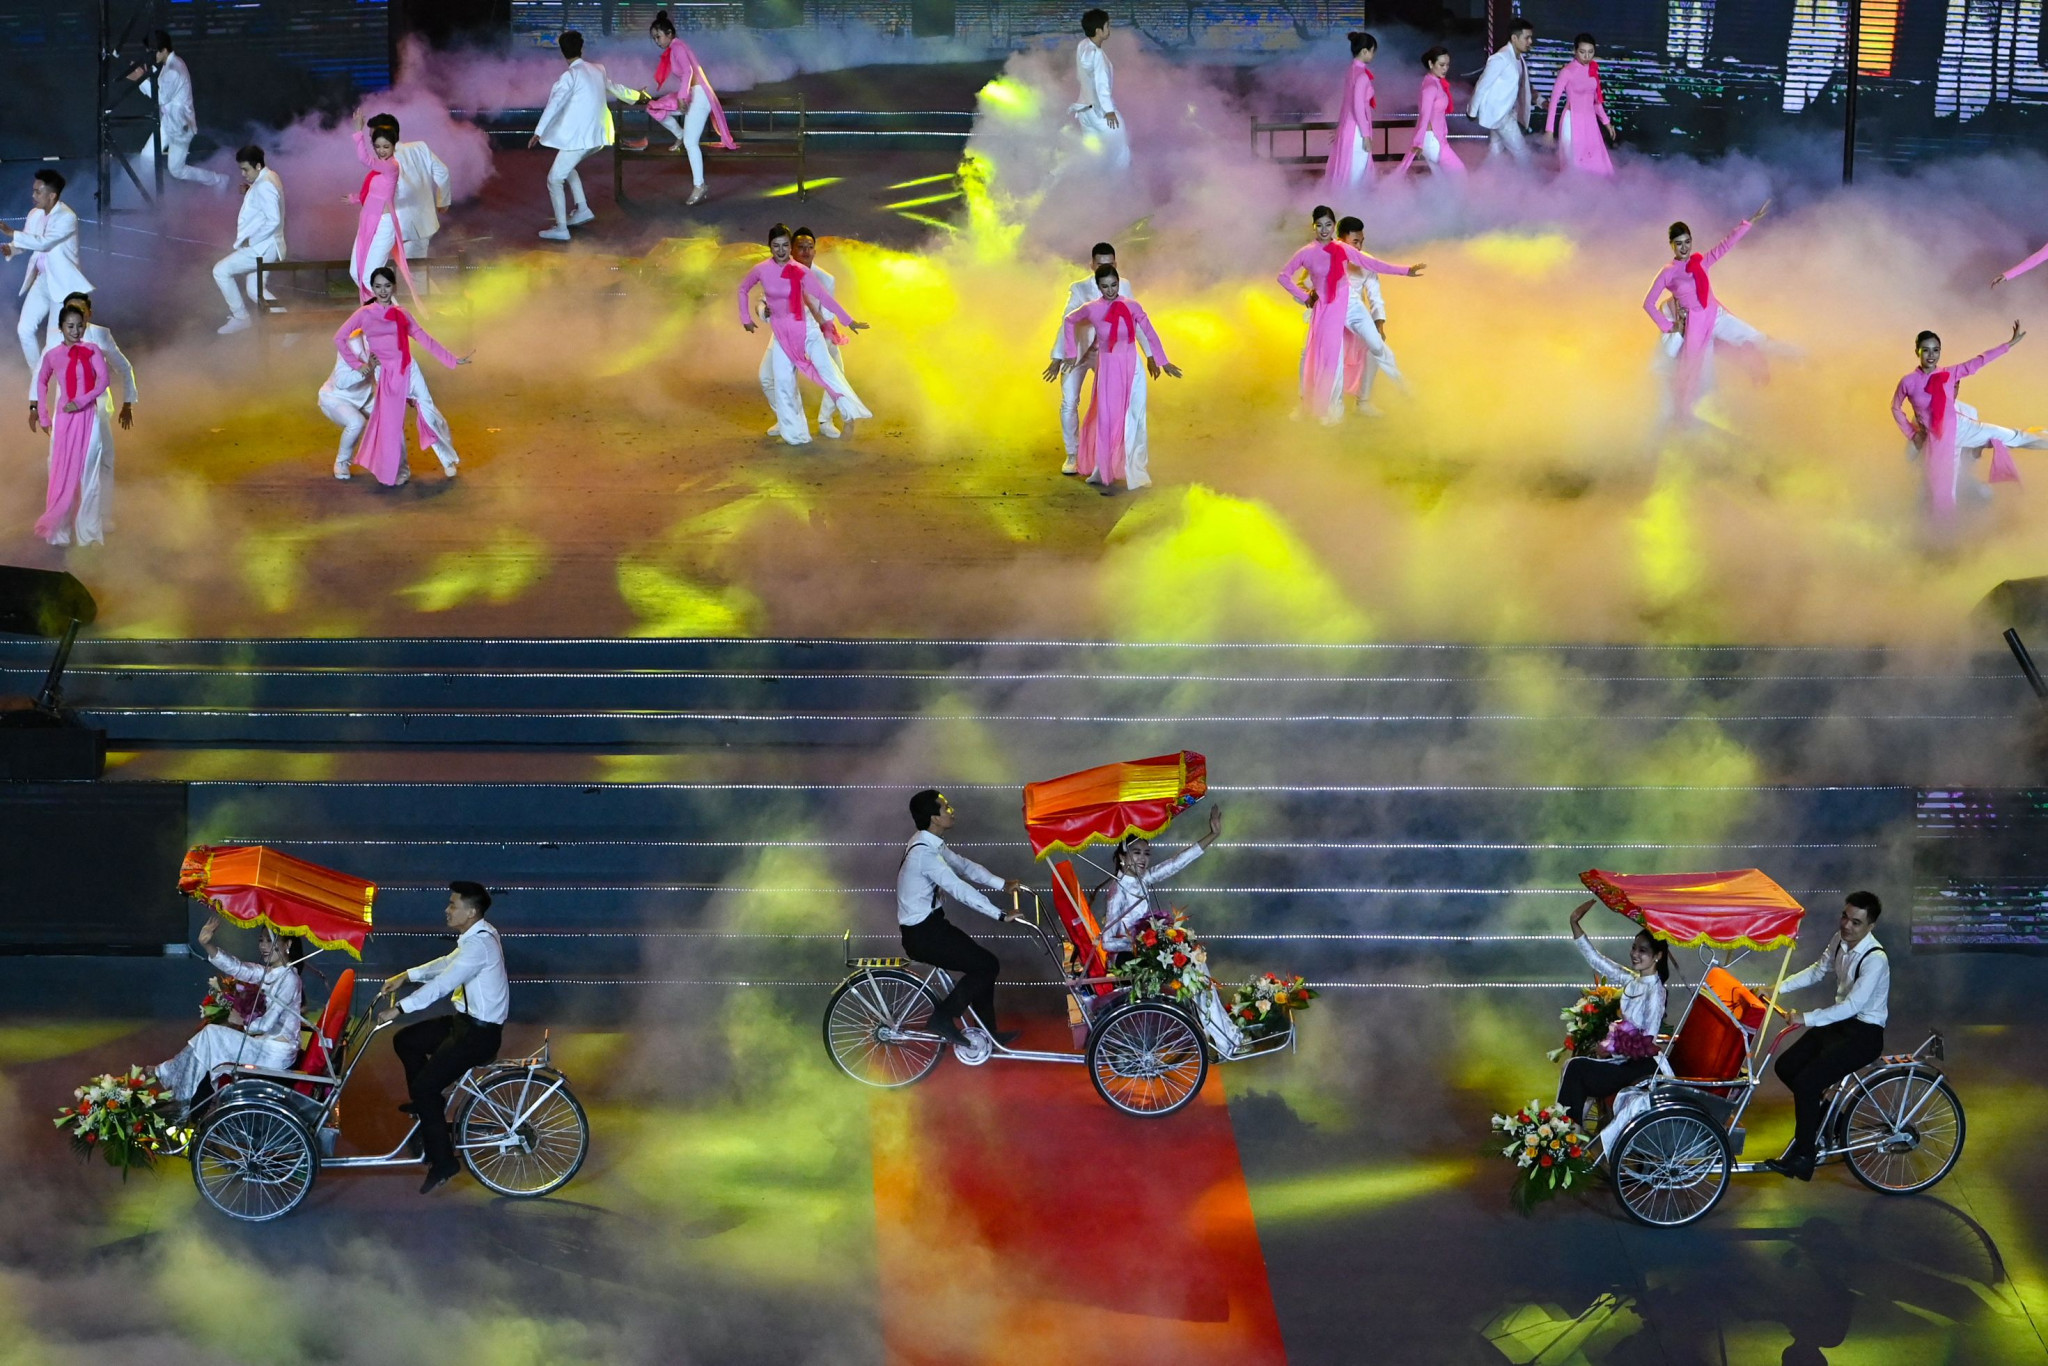 Vietnam hosted the 2021 SEA Games this year due to the COVID-19 pandemic ©Getty Images